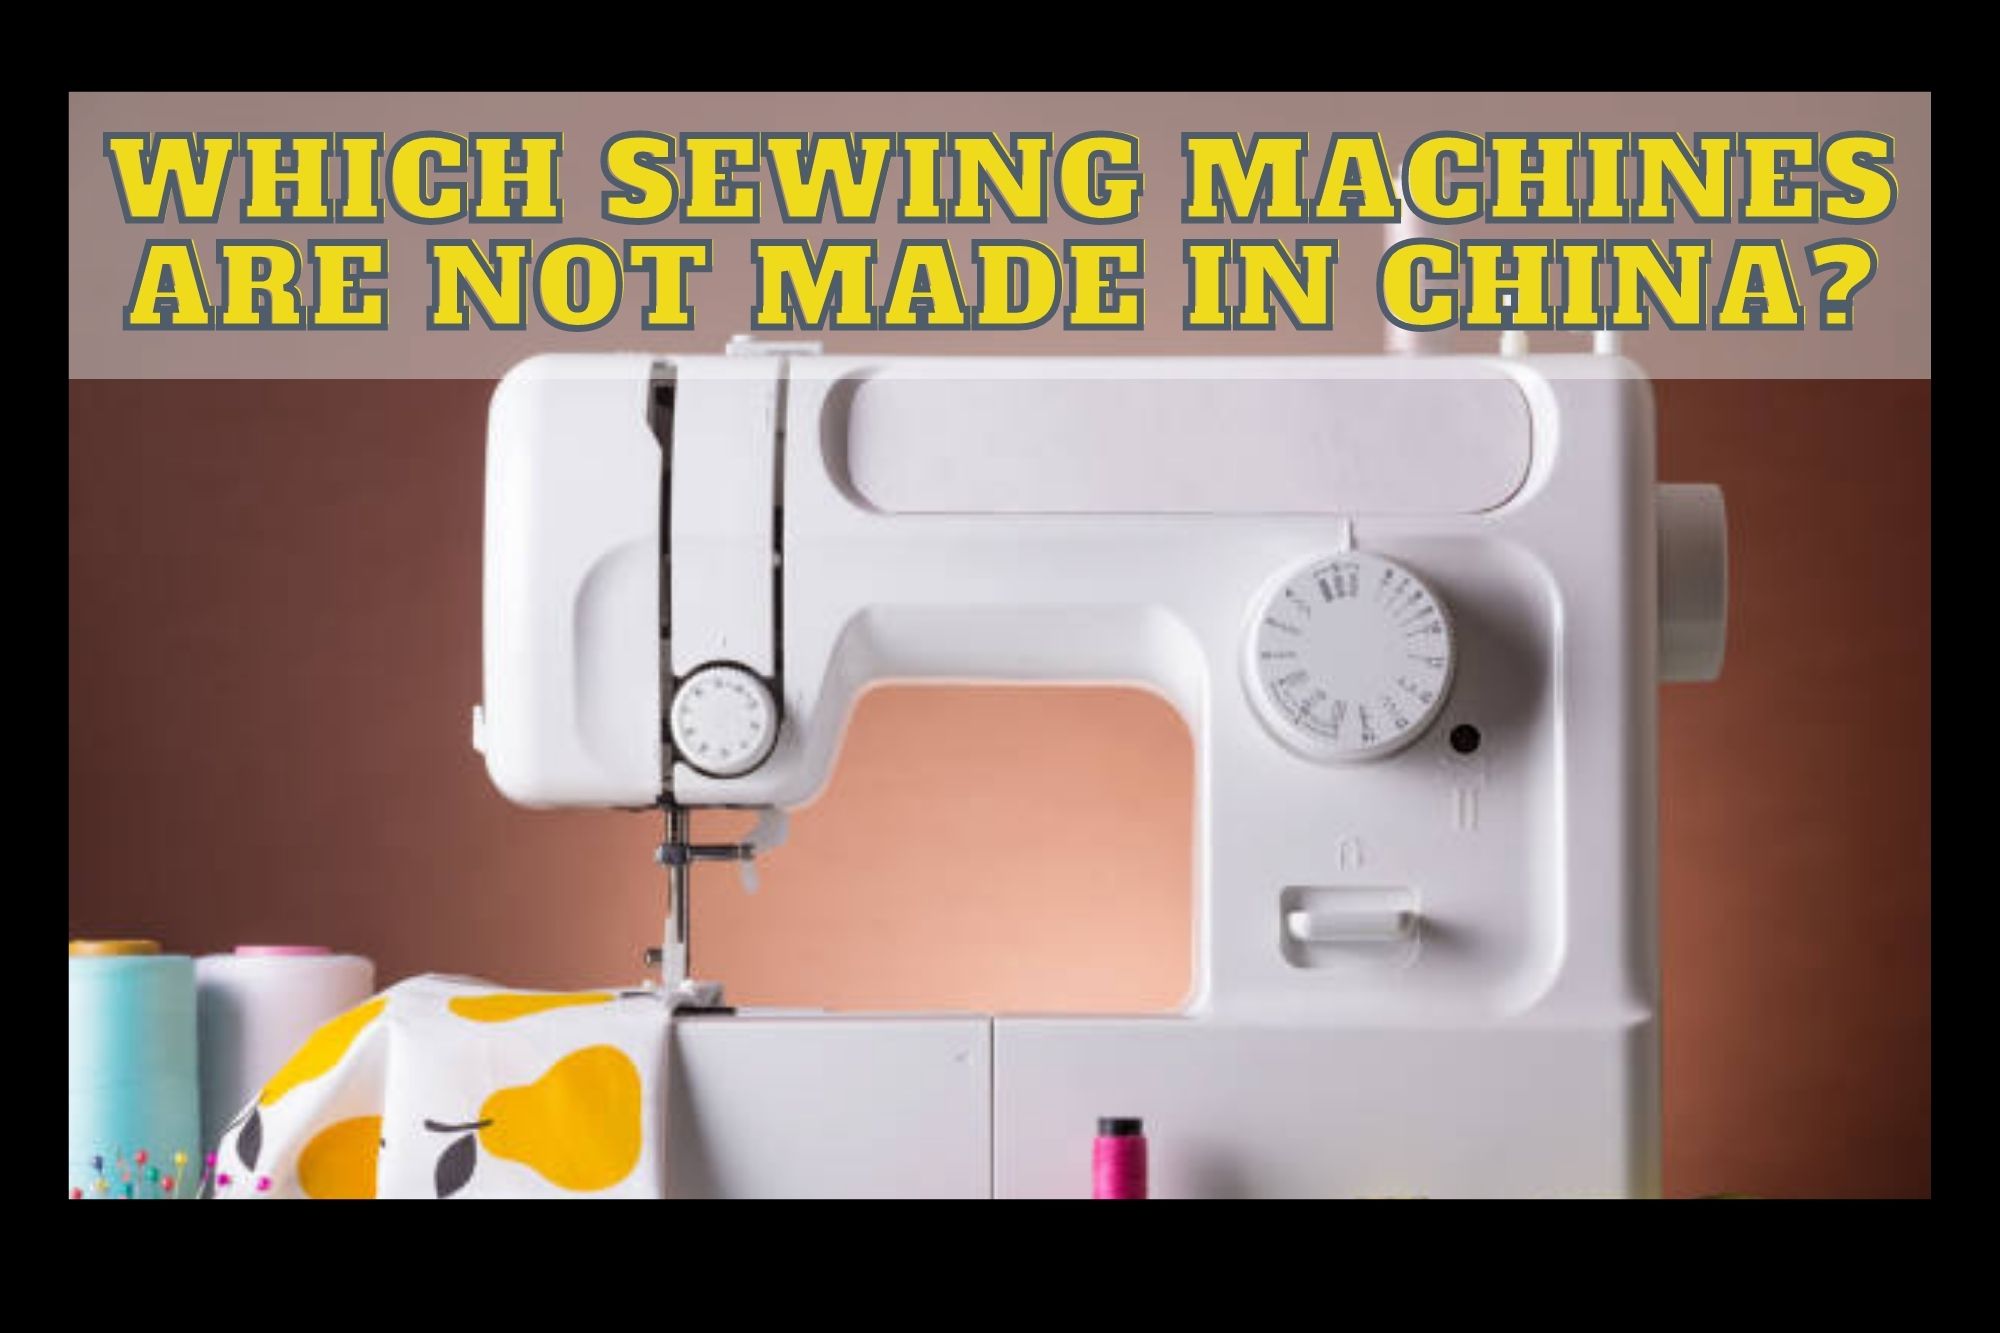 Which Sewing Machines Are Not Made in China?